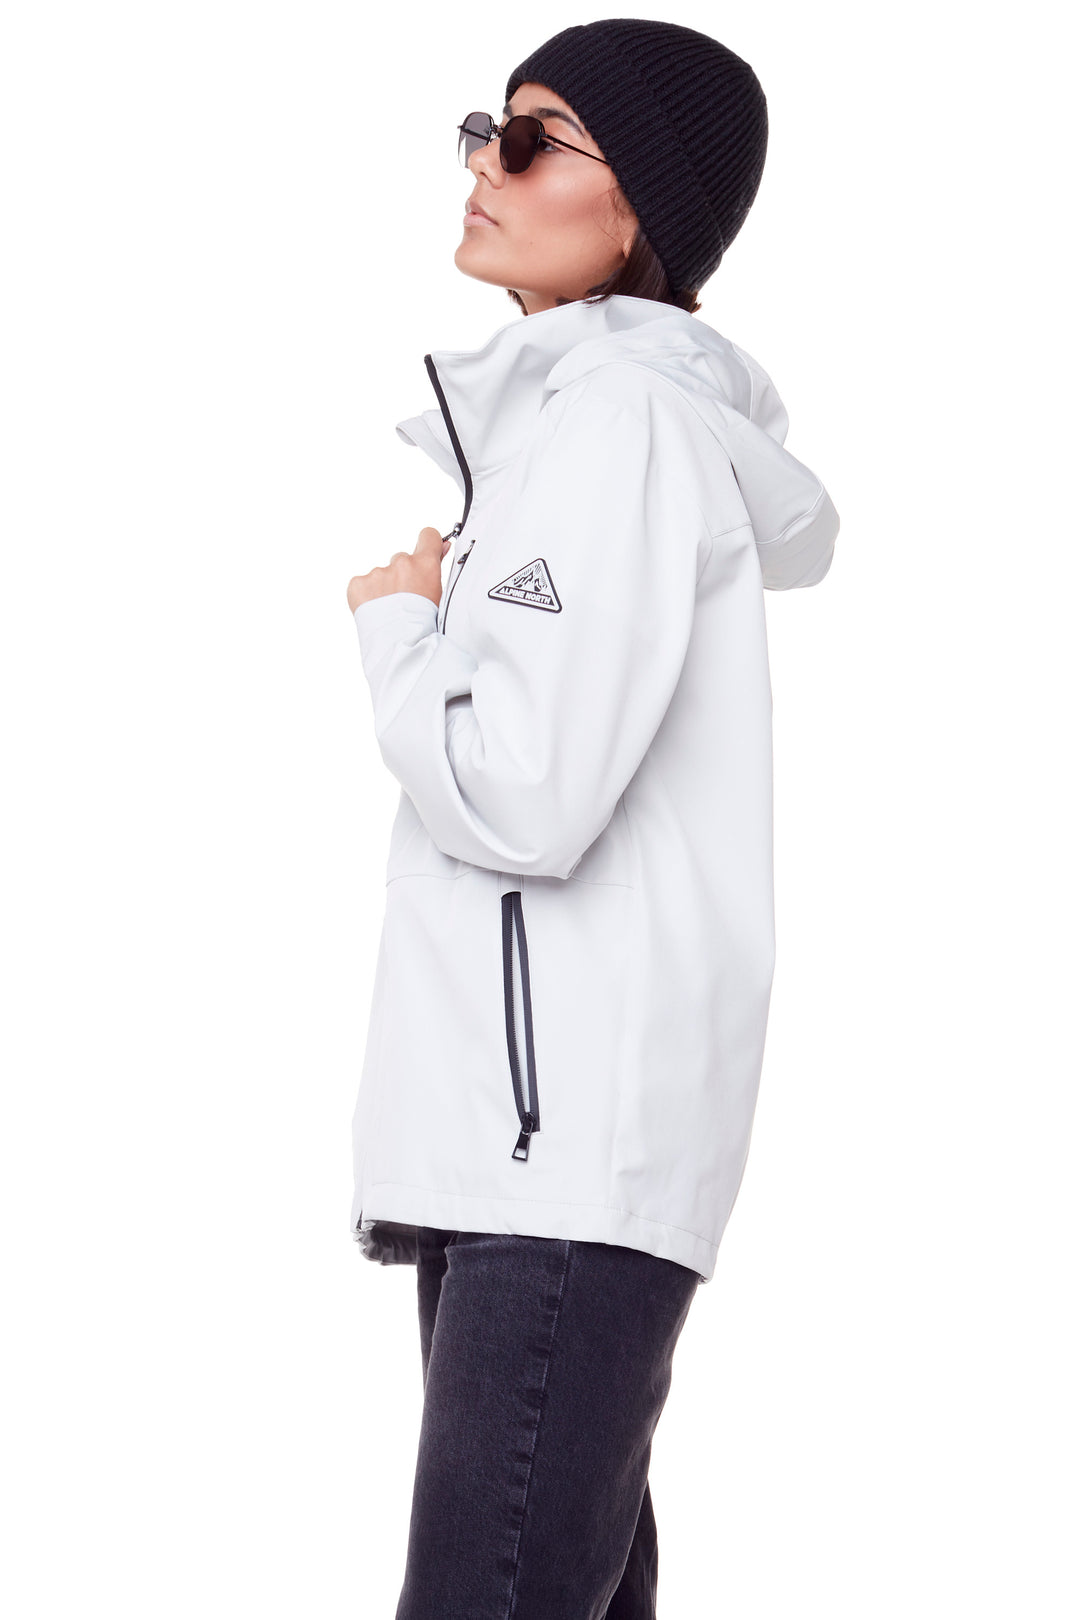 CARMACKS | UNISEX (RECYCLED) MIDWEIGHT RAIN SHELL JACKET, CEMENT